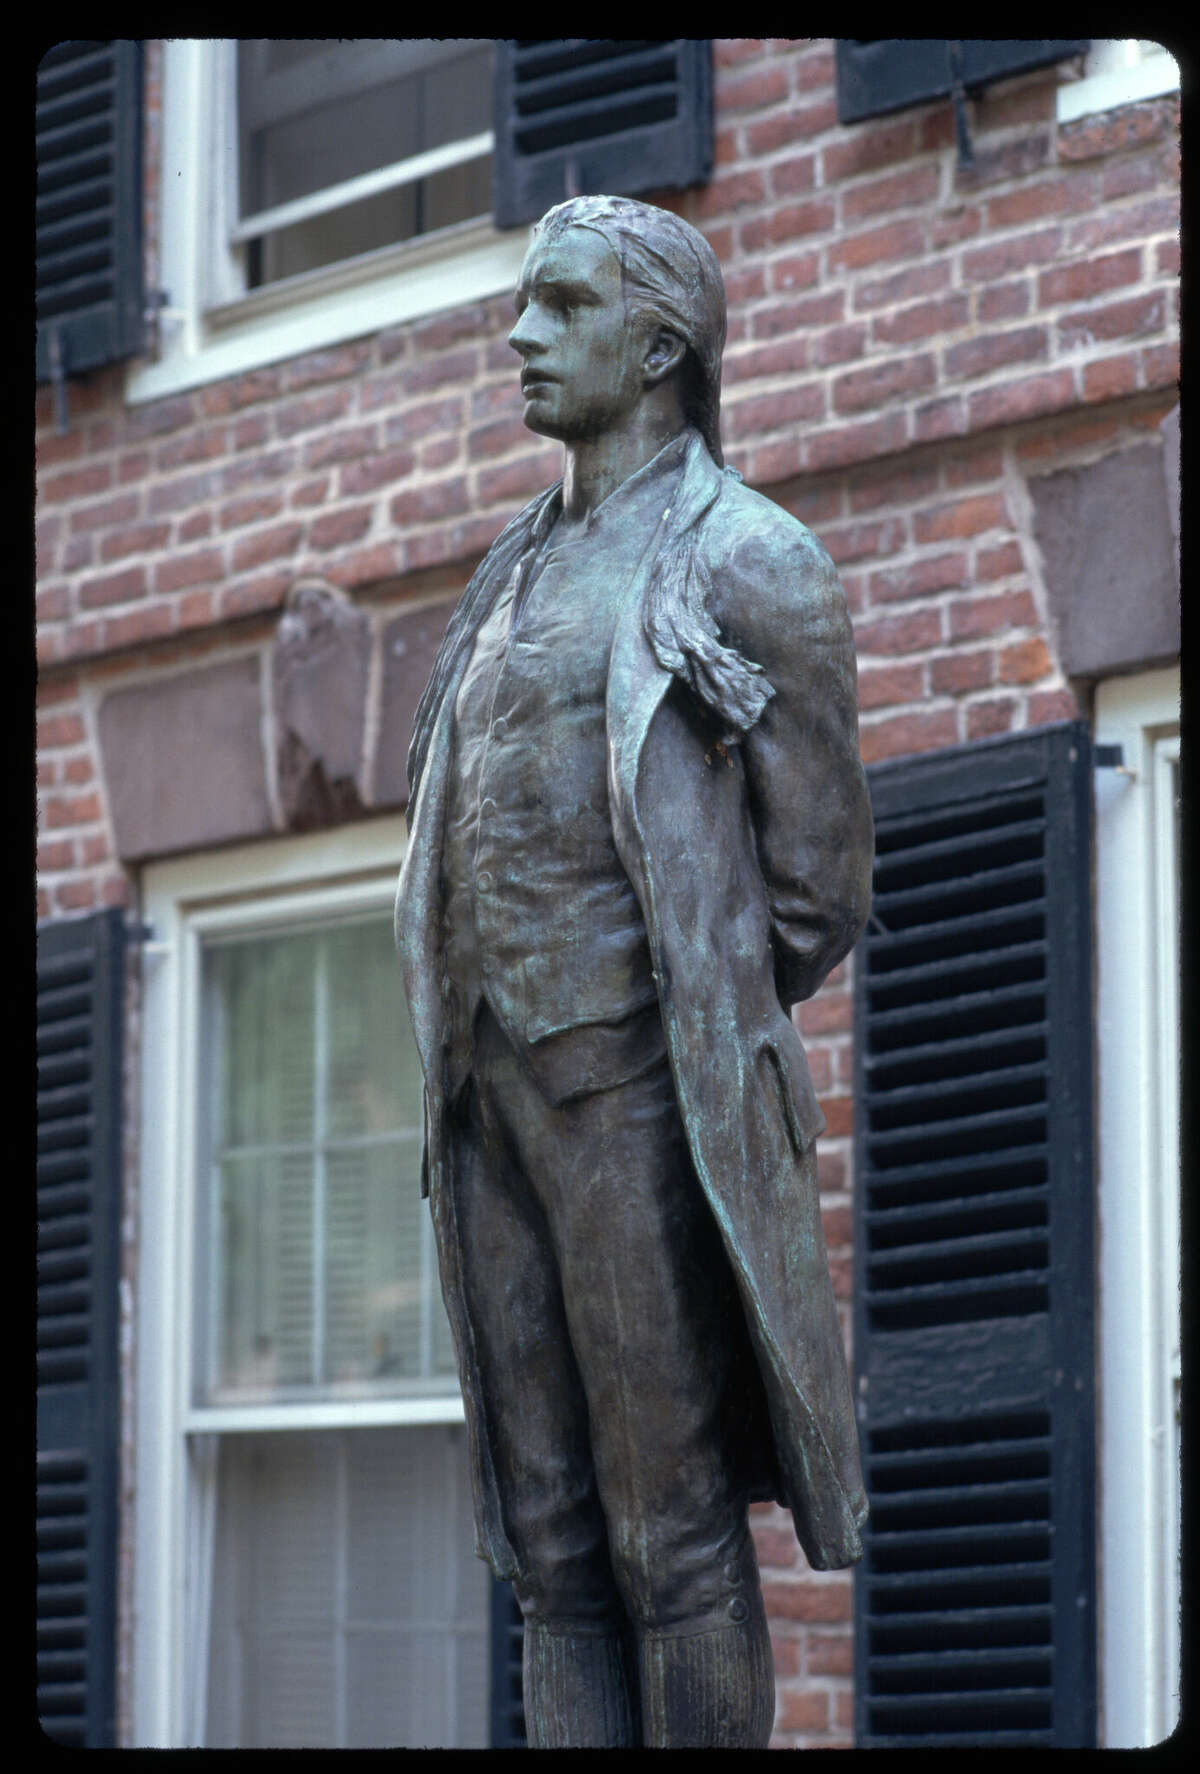 Nathan Hale's statue stands at his alma mater, Yale University.